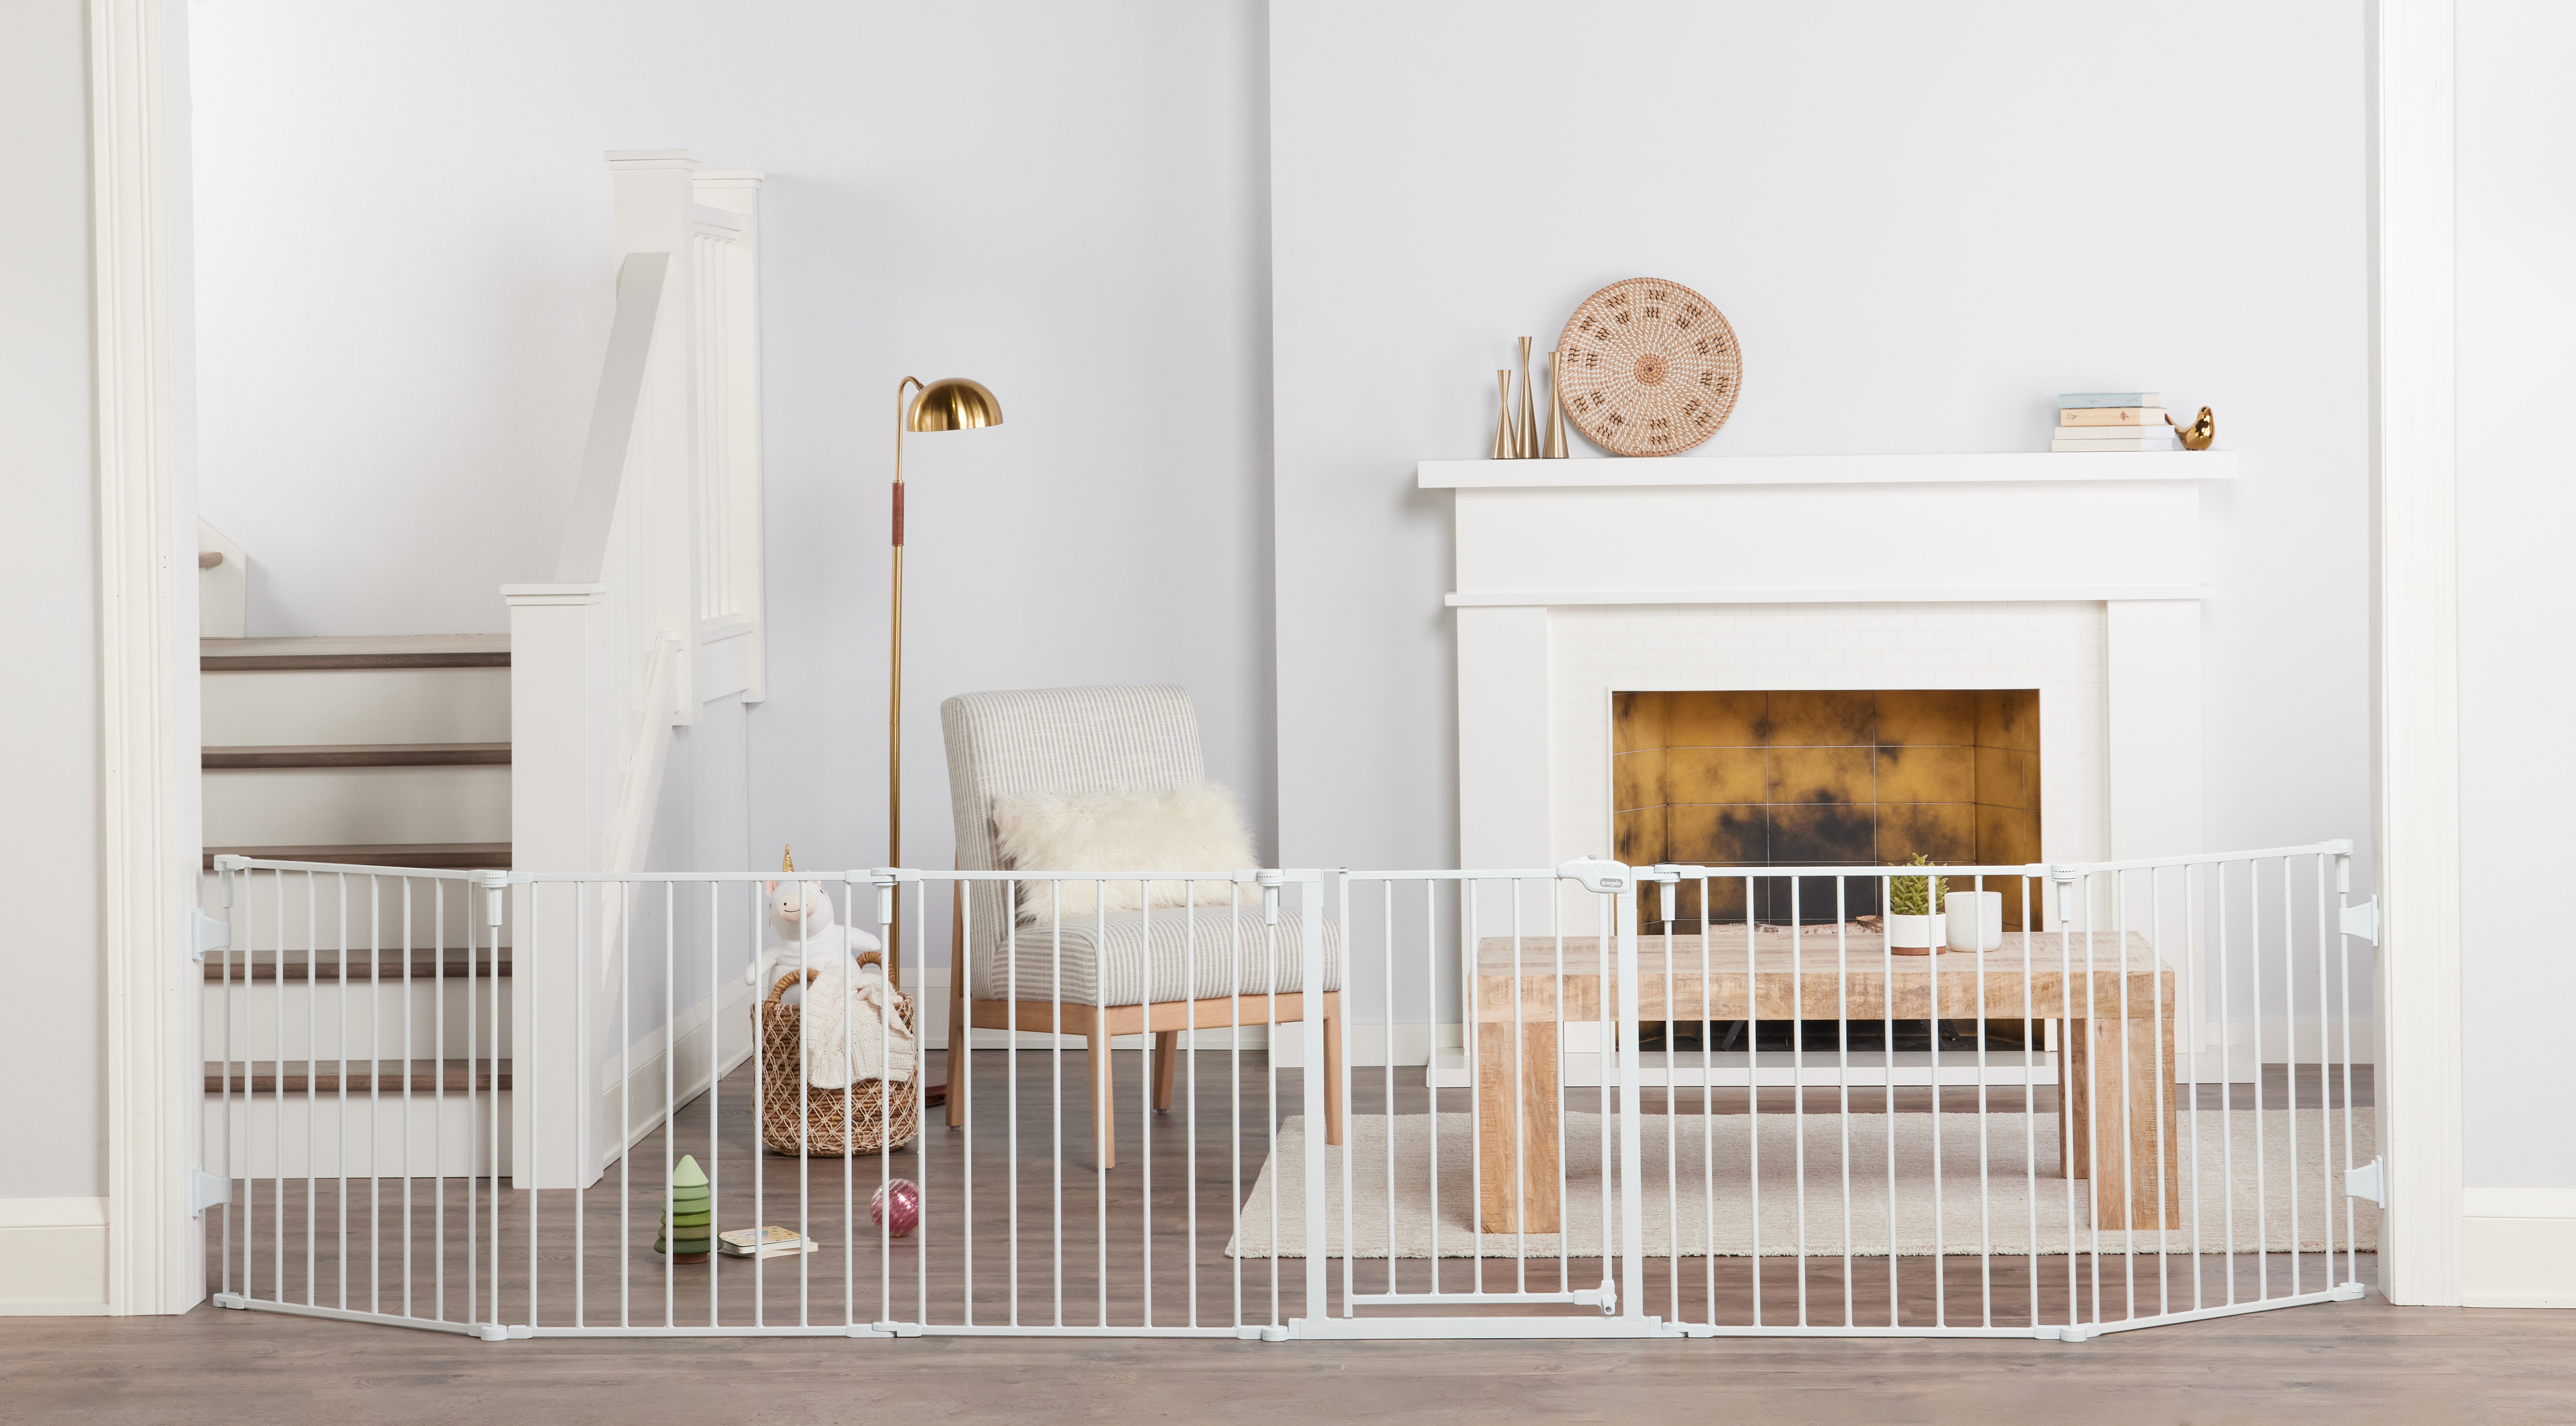 Regalo Super Wide Baby Gate, Features Play Yard Option, White, 144", Age Group 6-24 Months - image 4 of 7